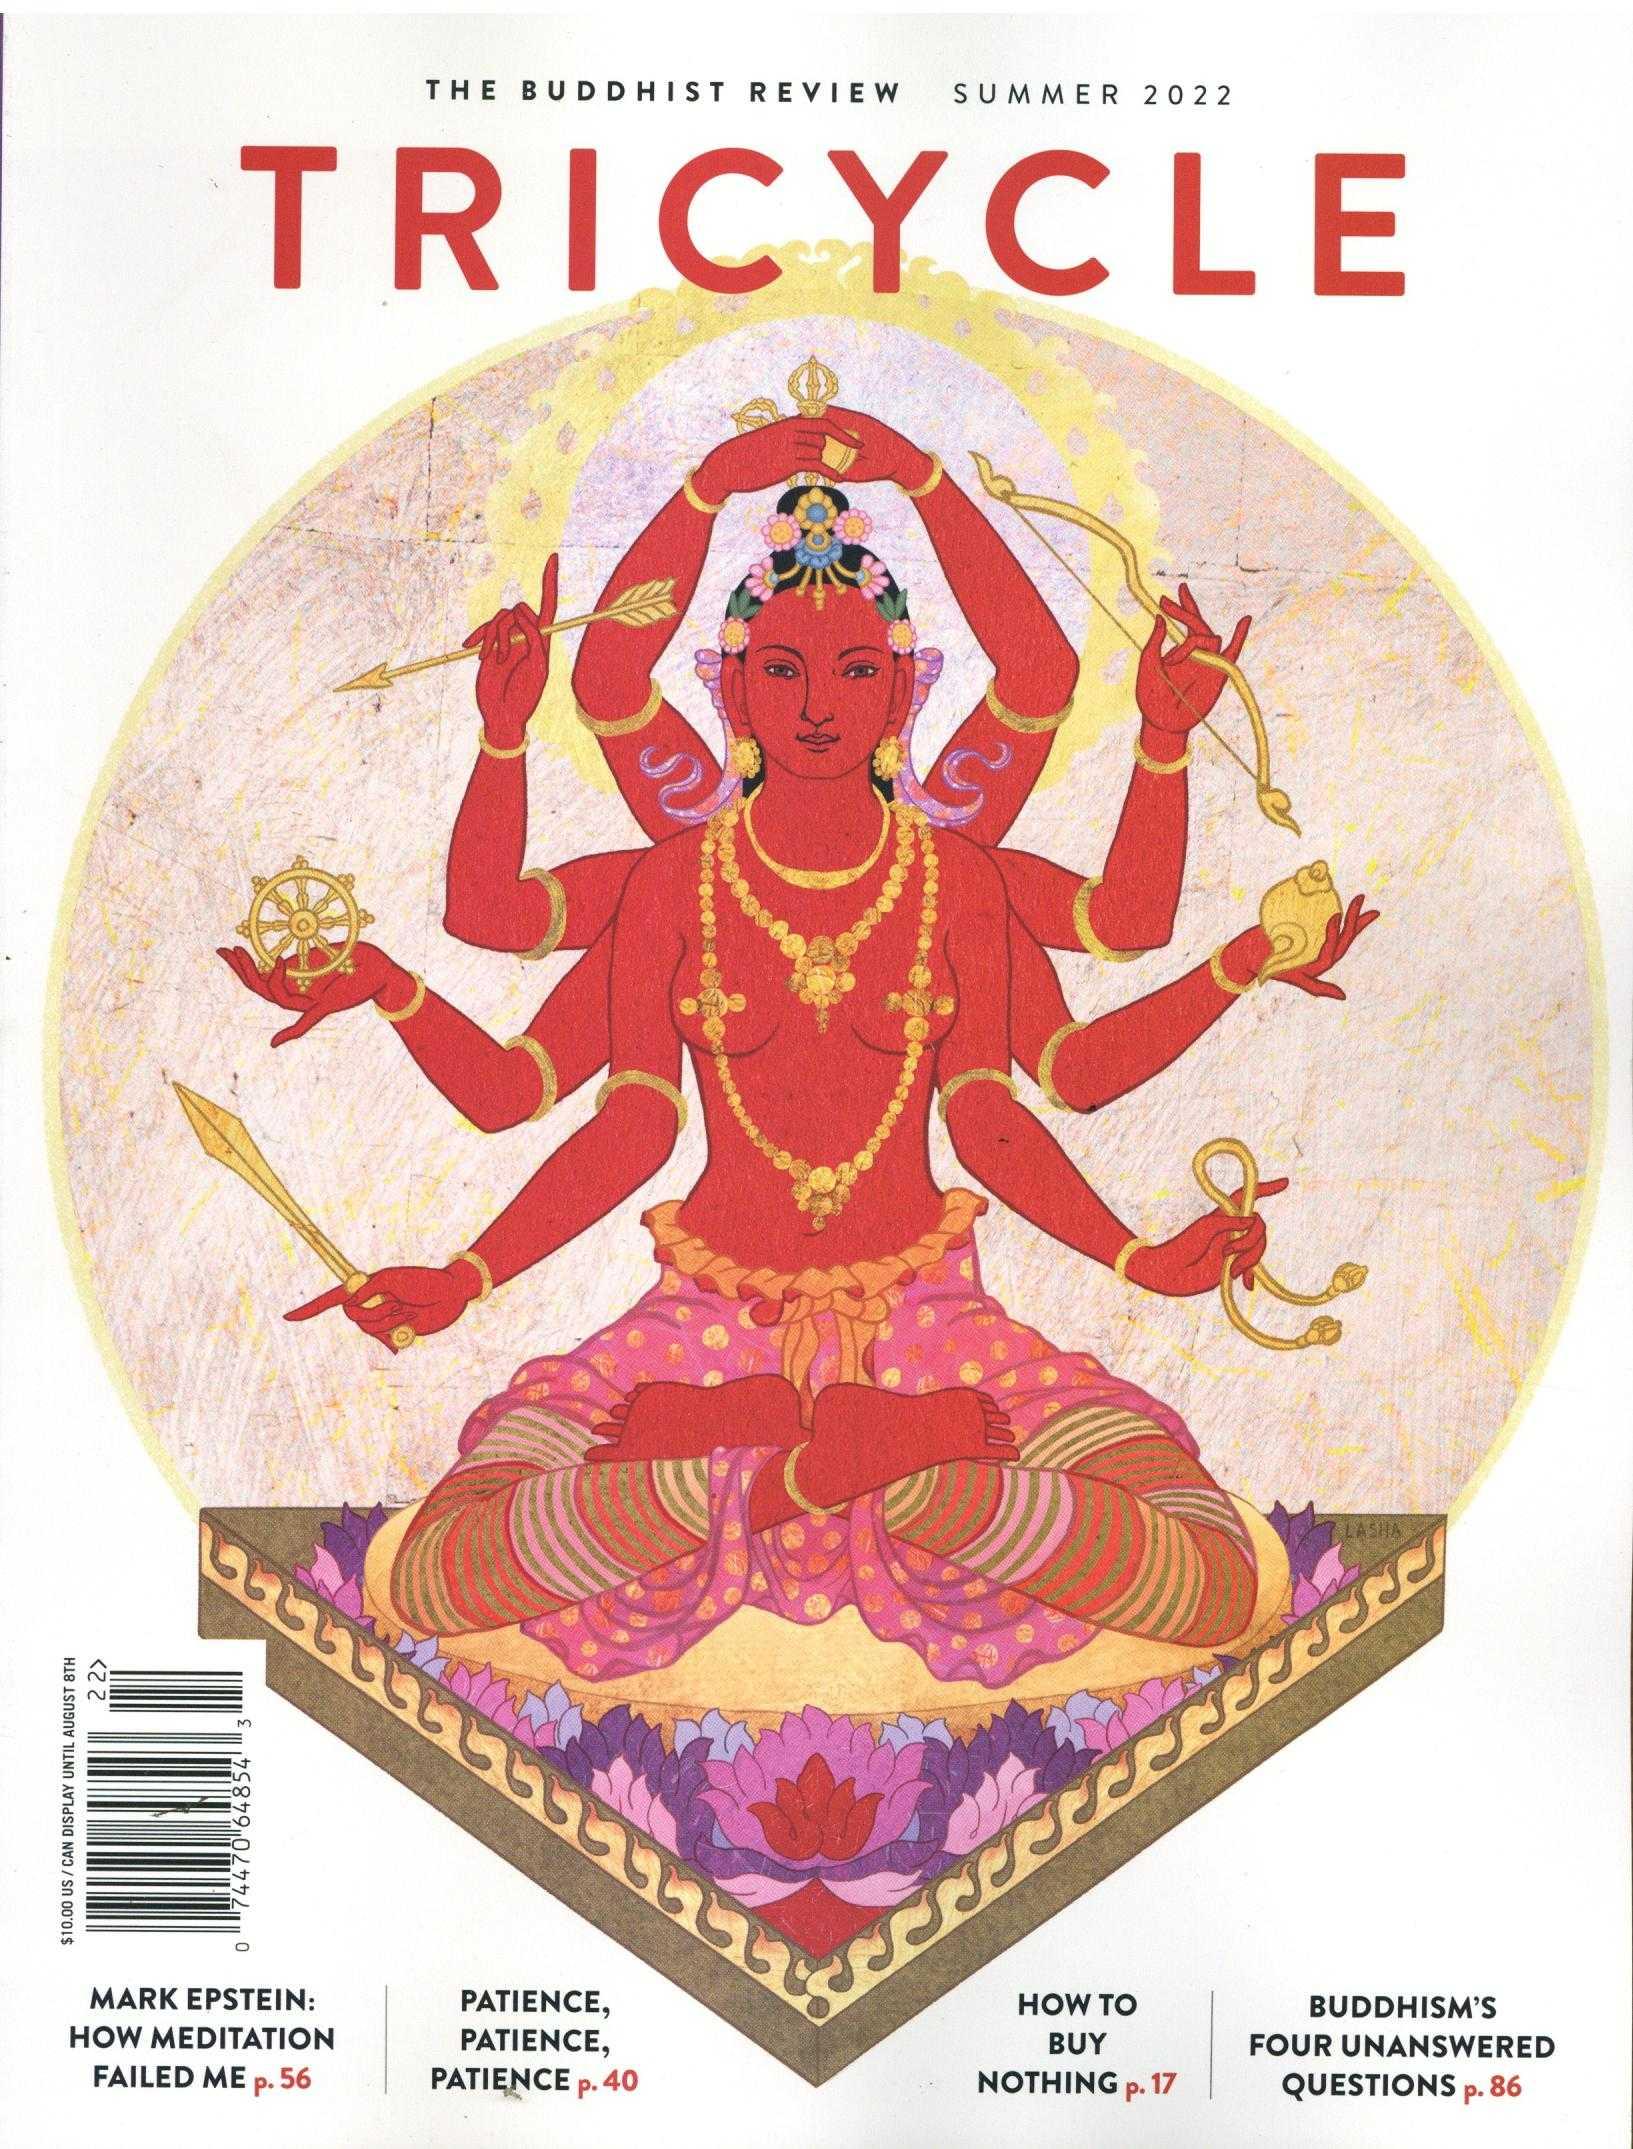 Tricycle- Buddhist Review